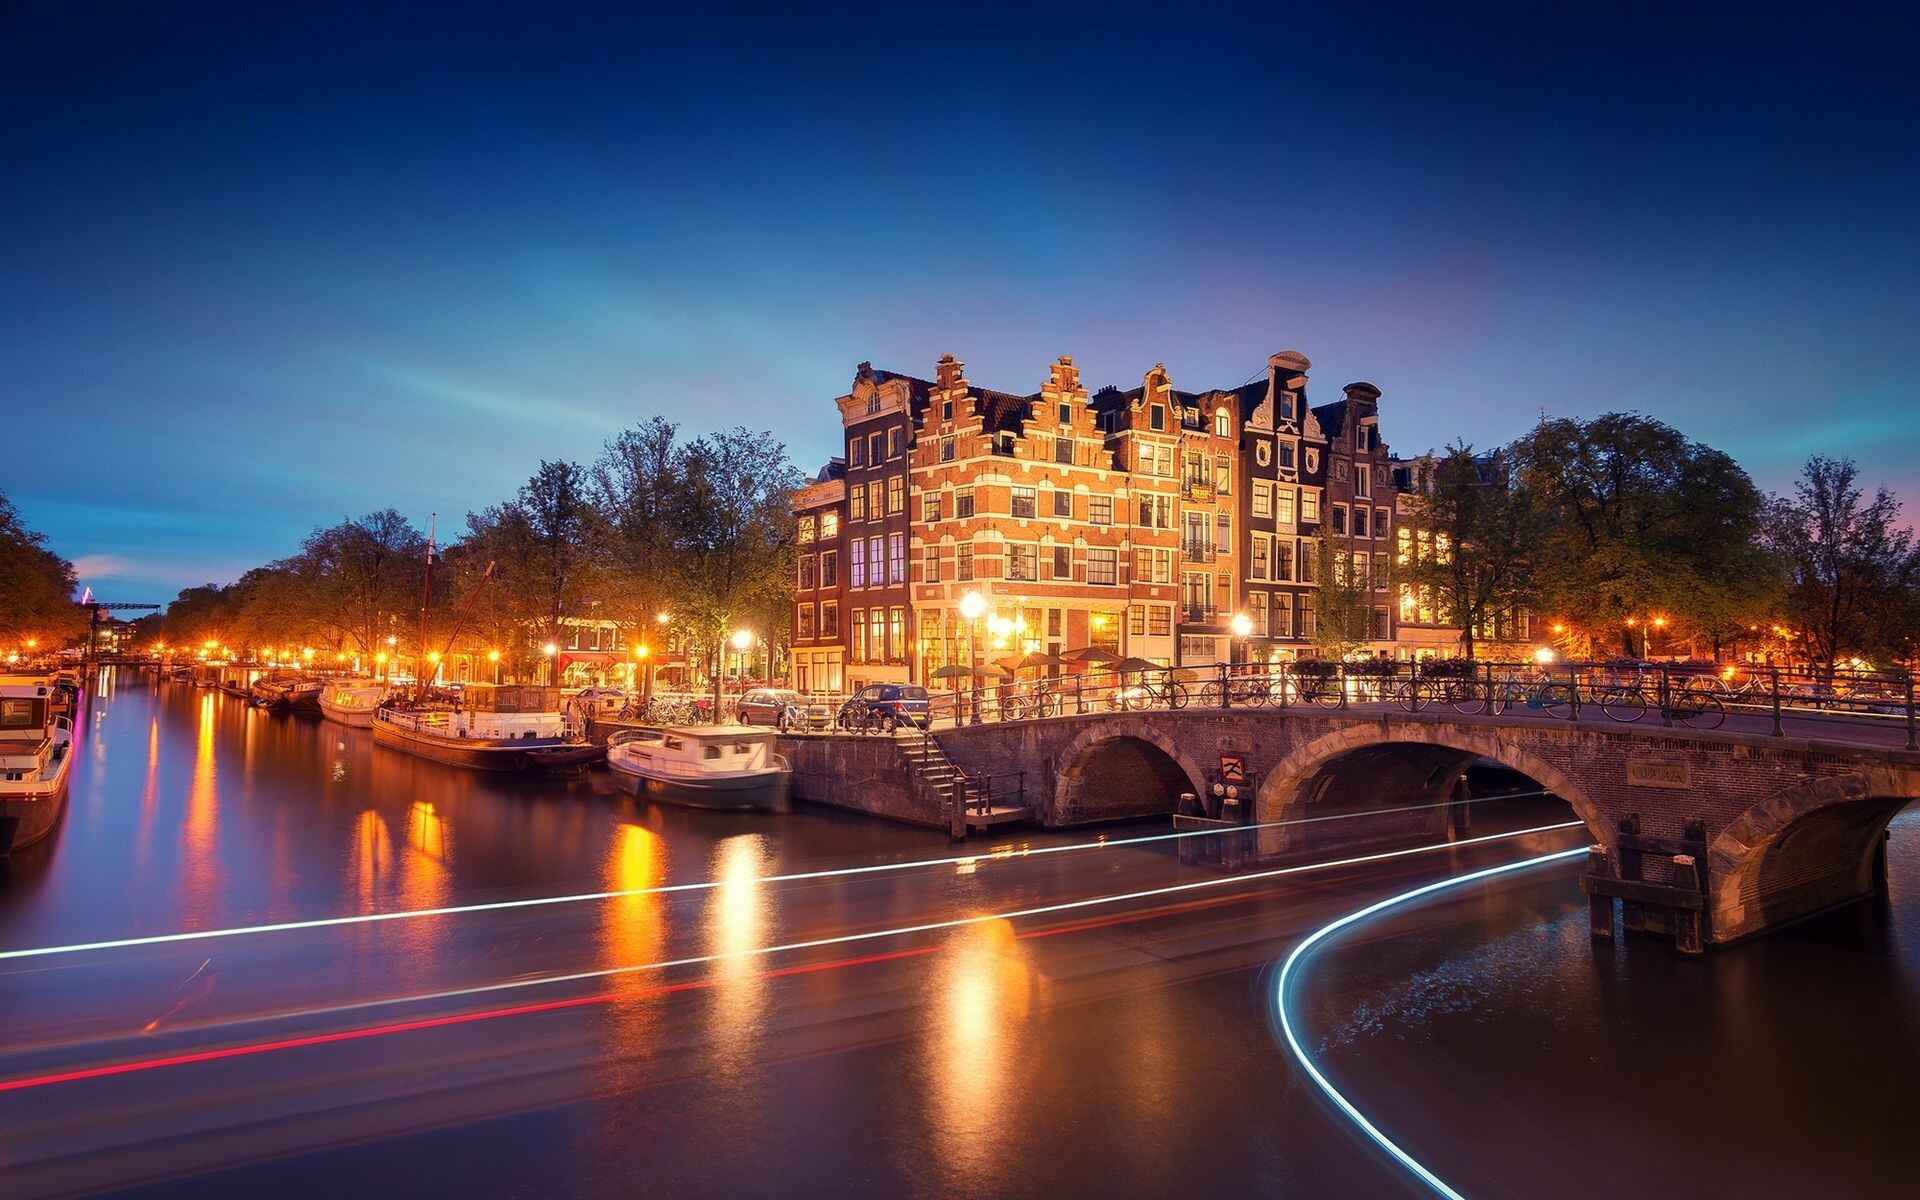 Amsterdam: The 17th-century canal ring area, Listed as UNESCO World Heritage Site in 2010. 1920x1200 HD Wallpaper.